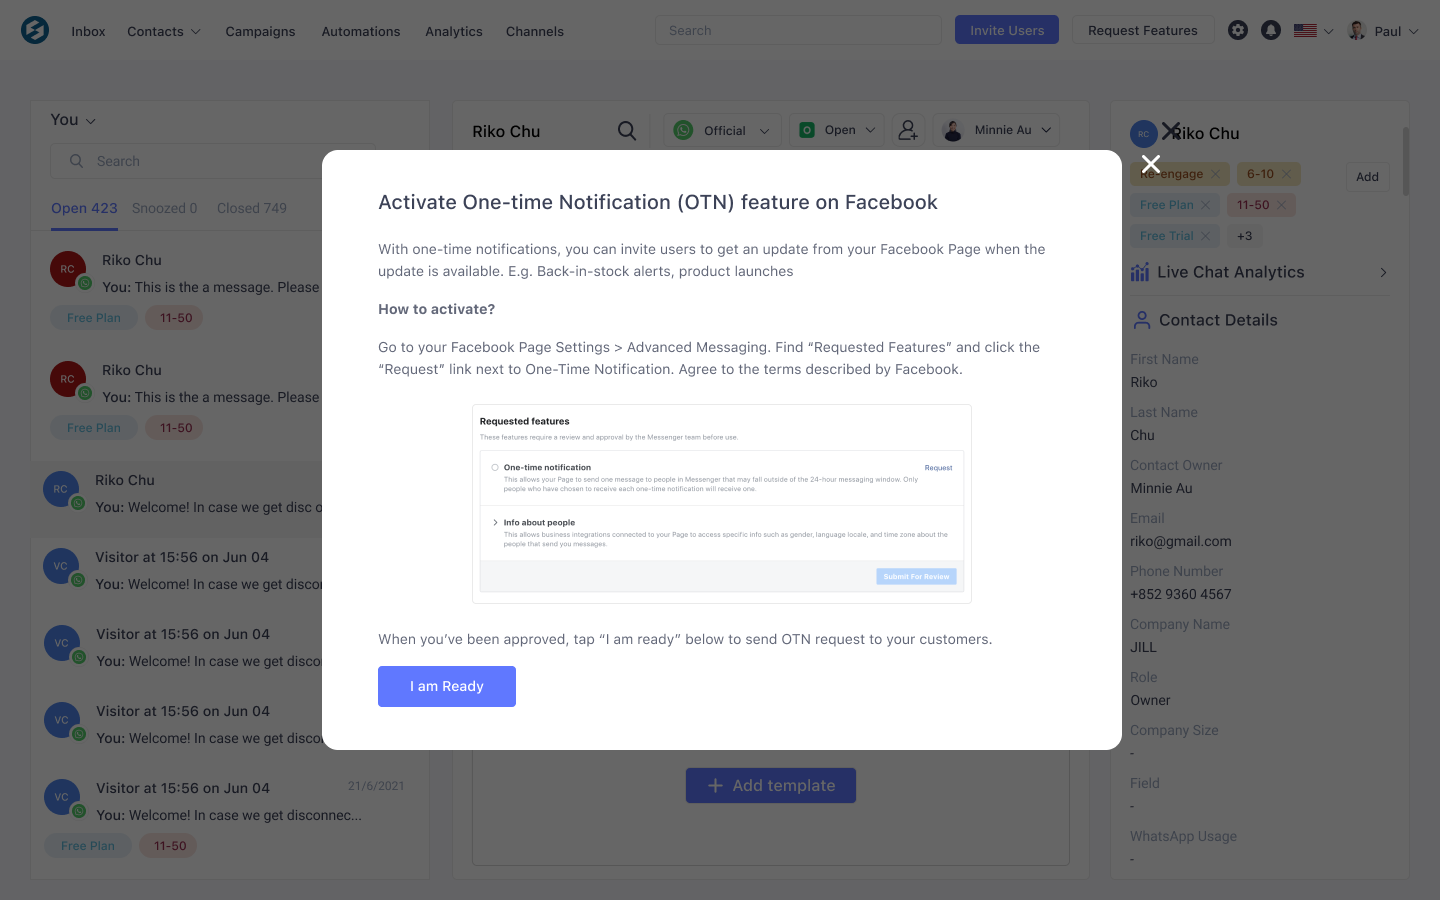 Enable OTN on your Facebook Business page